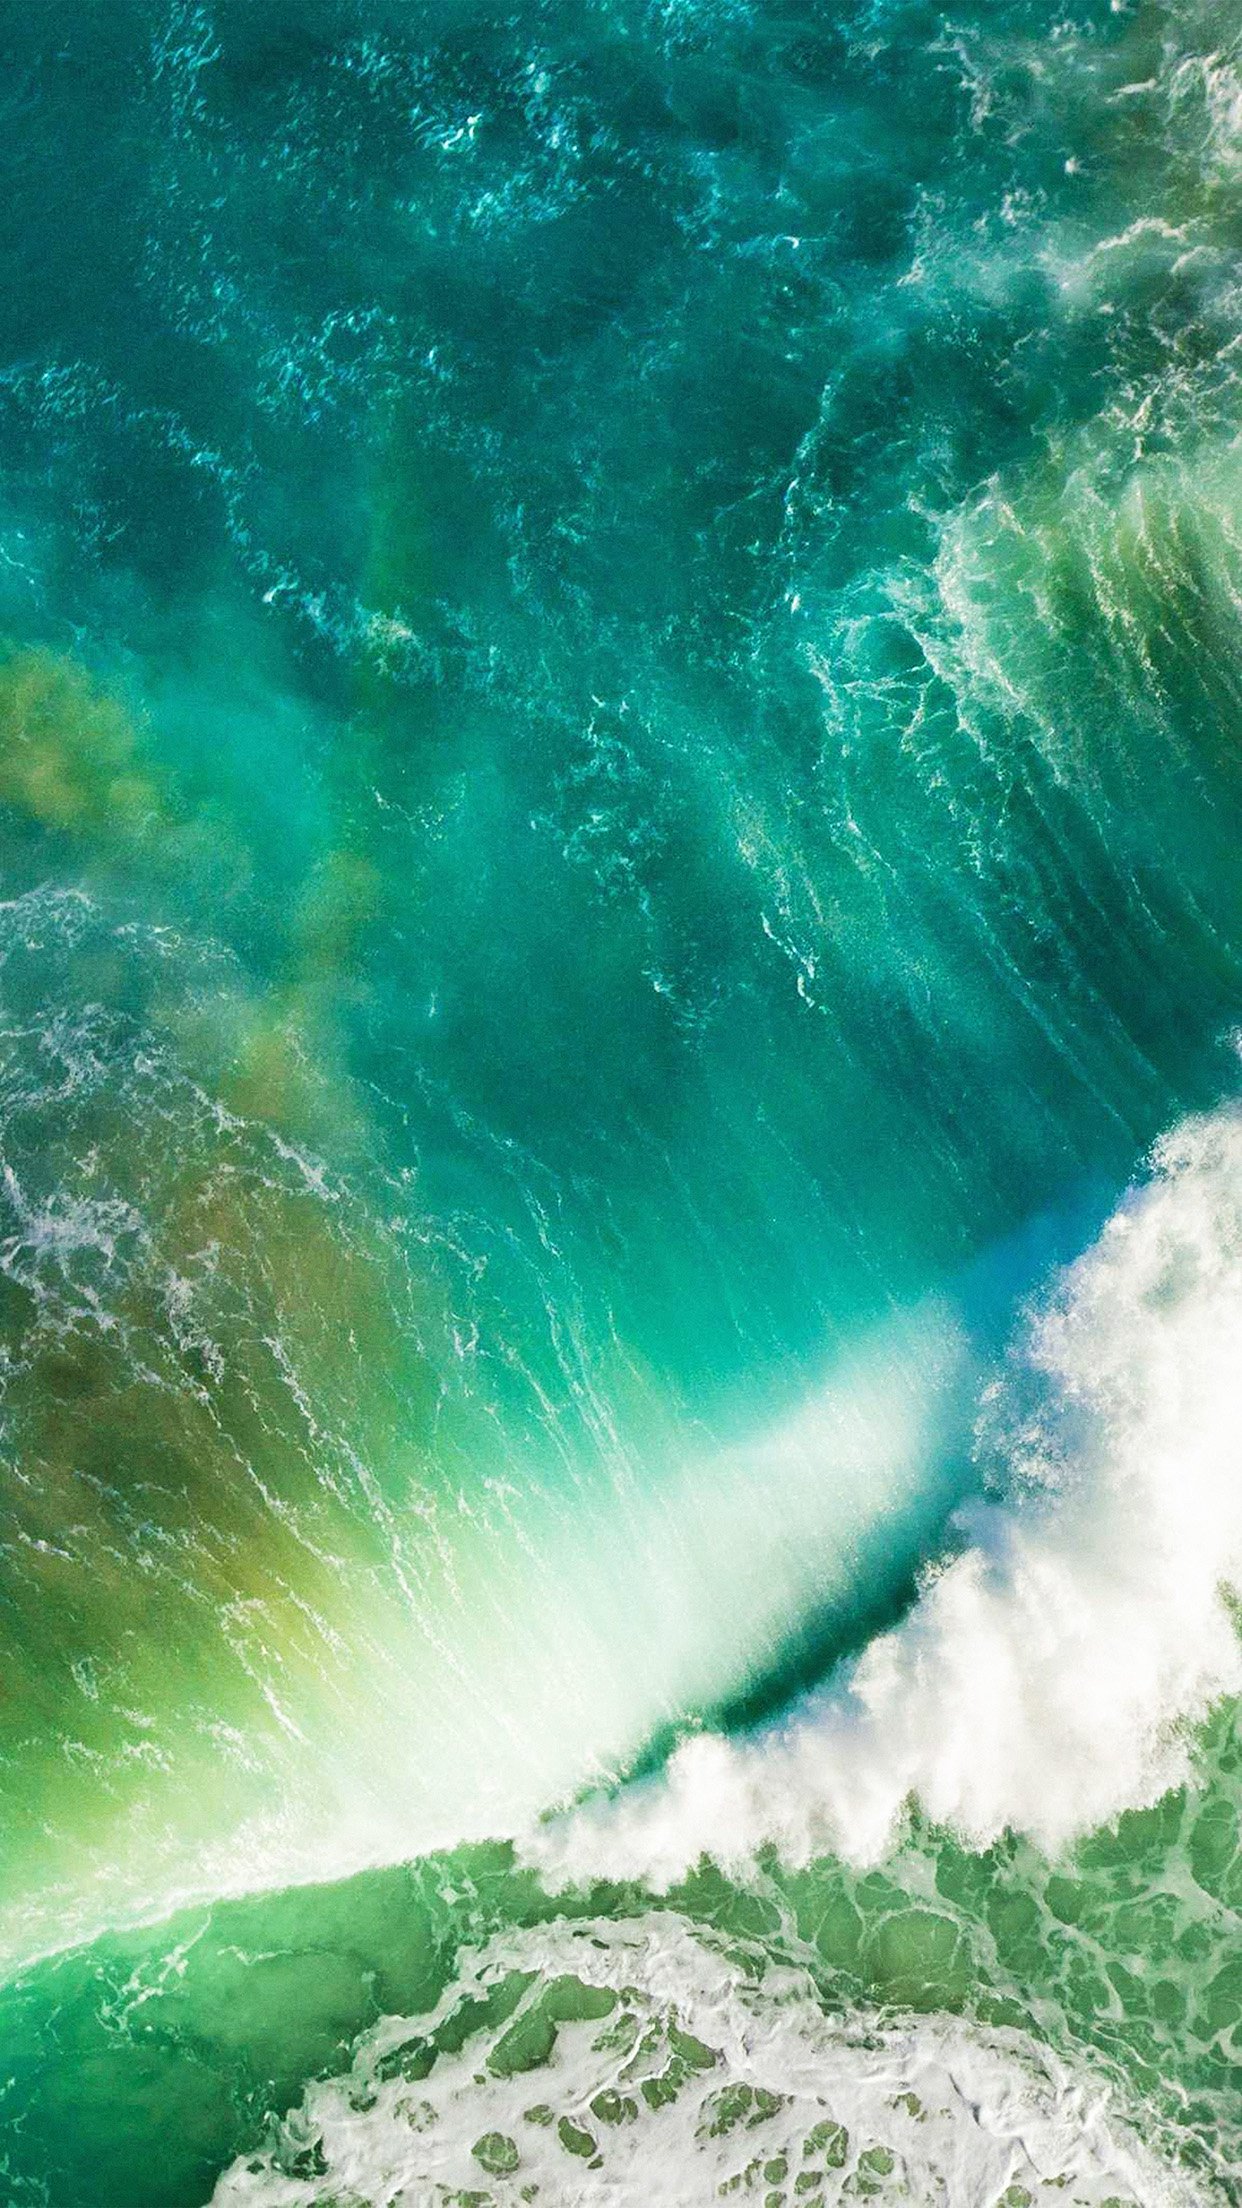 Ios10 Apple Iphone7 Wave Waterfall Official Art Illustration Android wallpaper